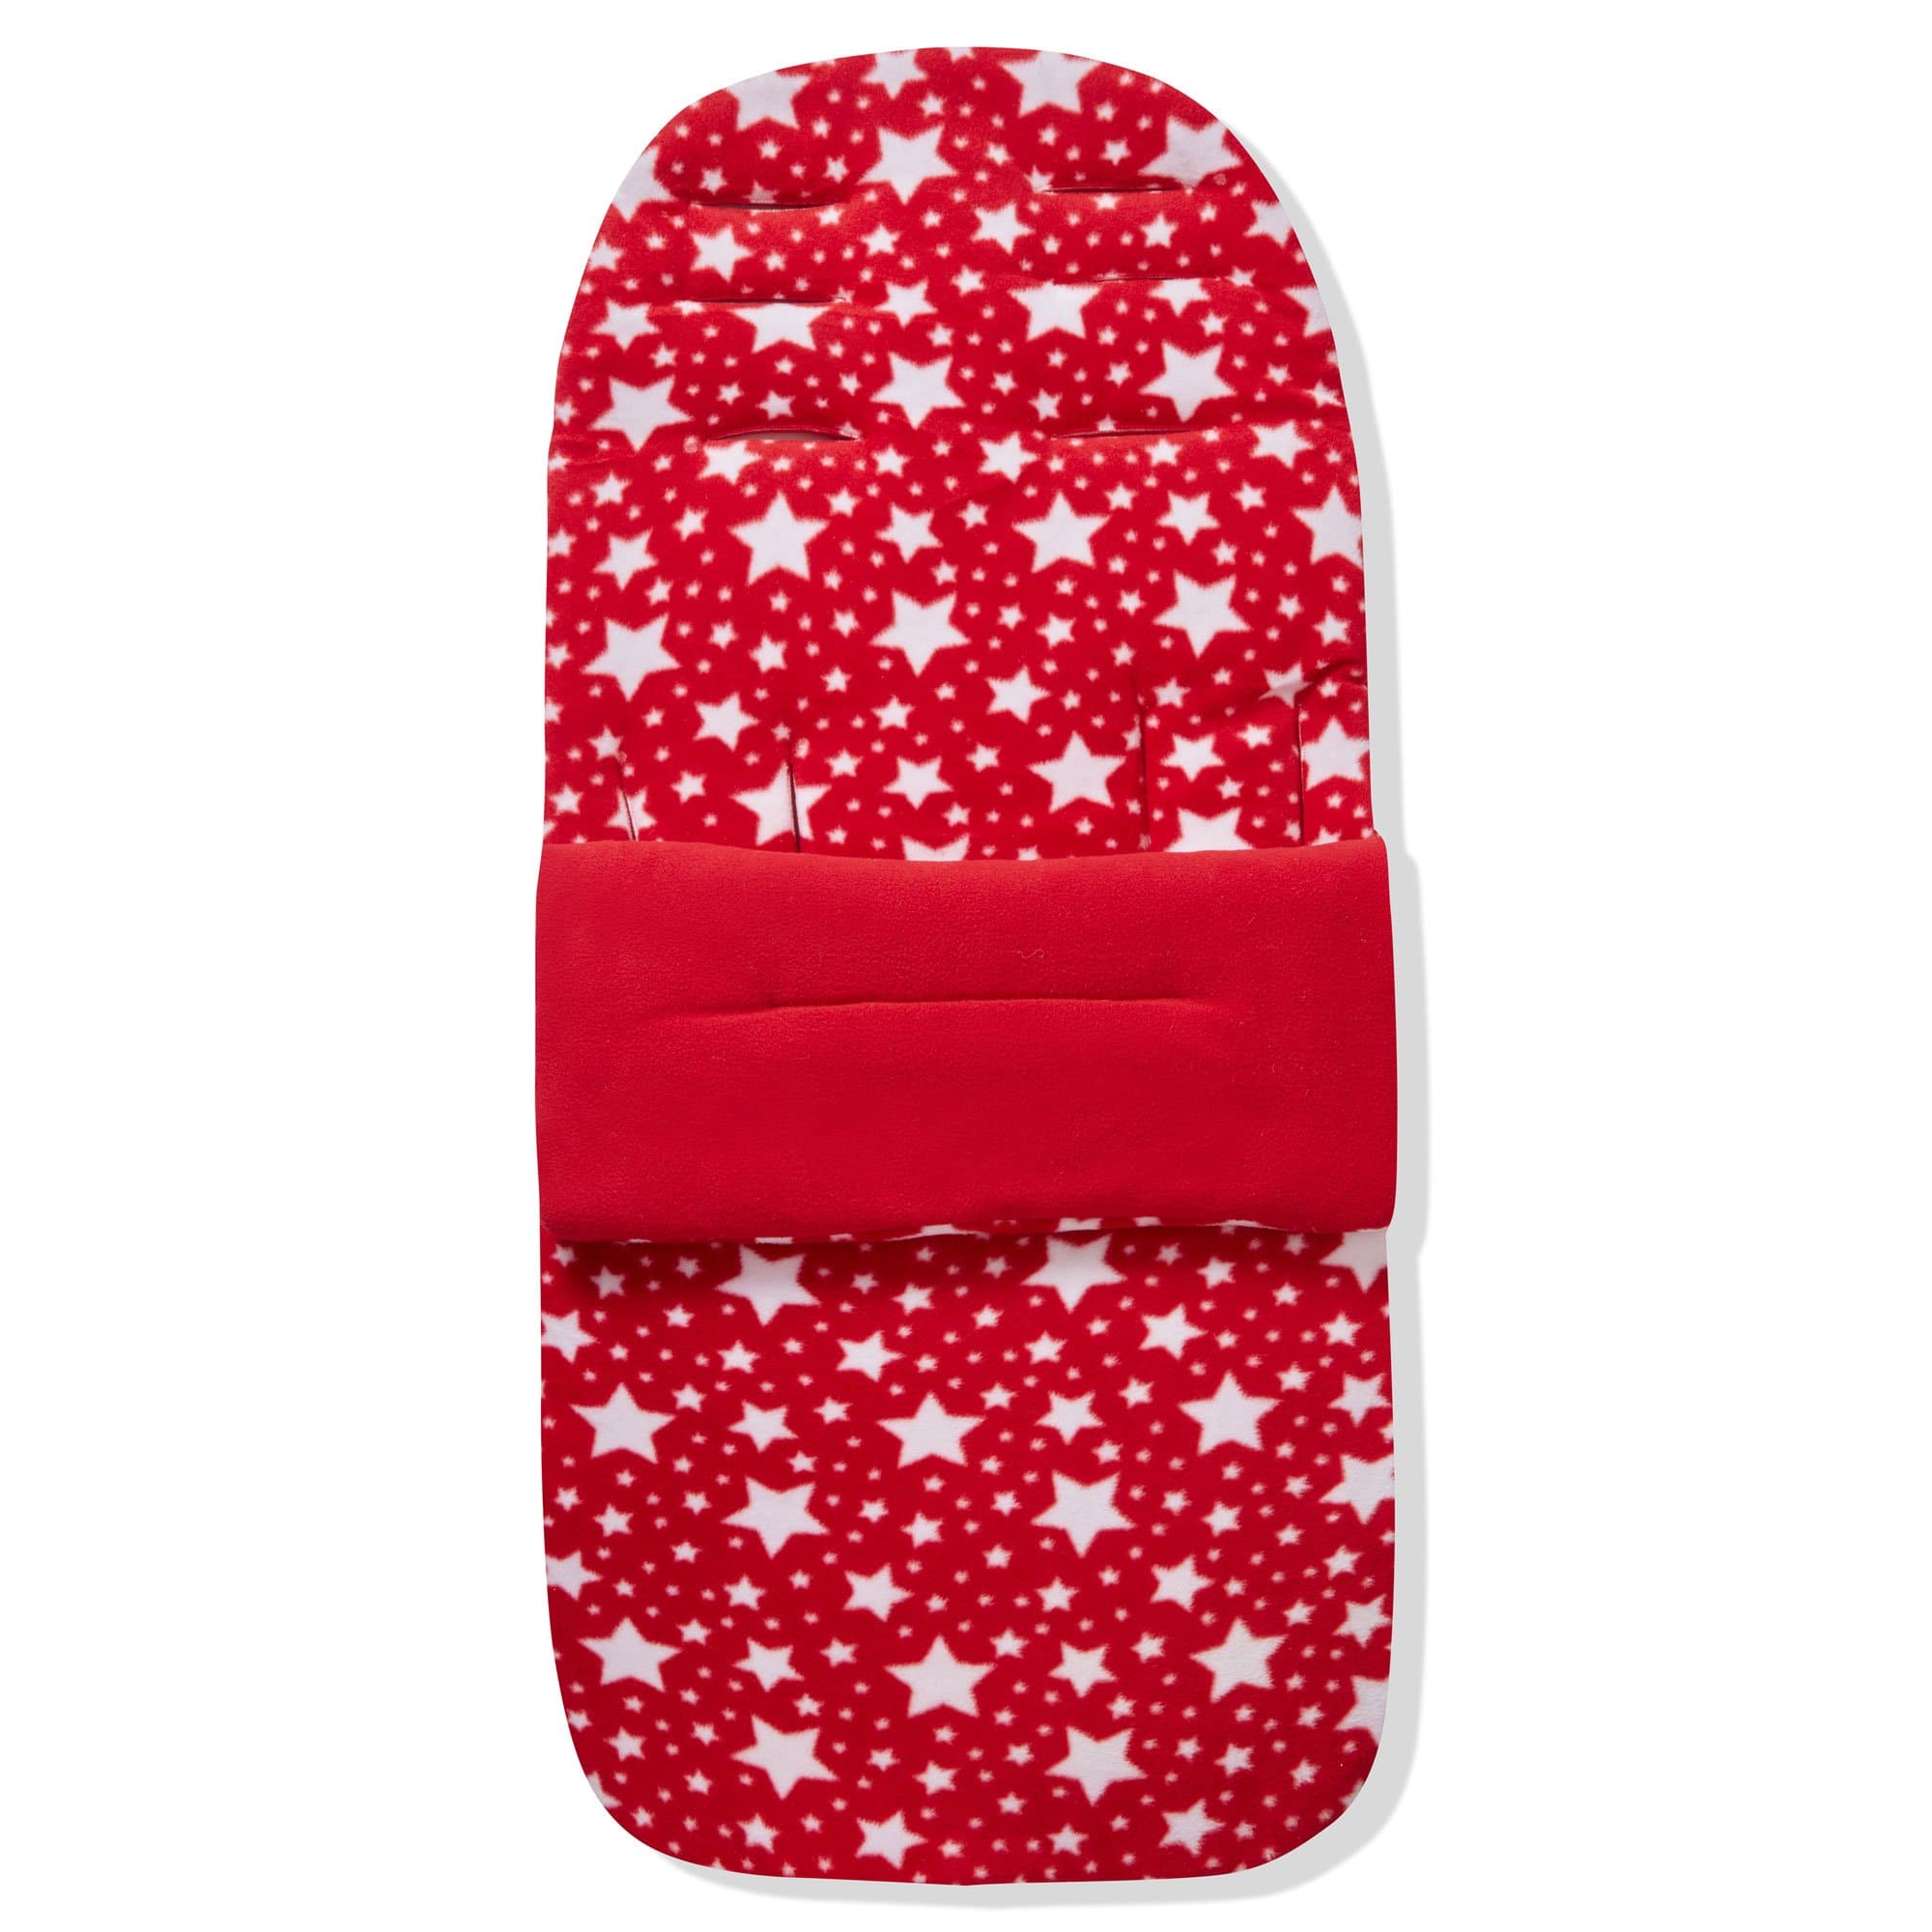 Fleece Footmuff / Cosy Toes Compatible with BabyDan - Red Star / Fits All Models | For Your Little One